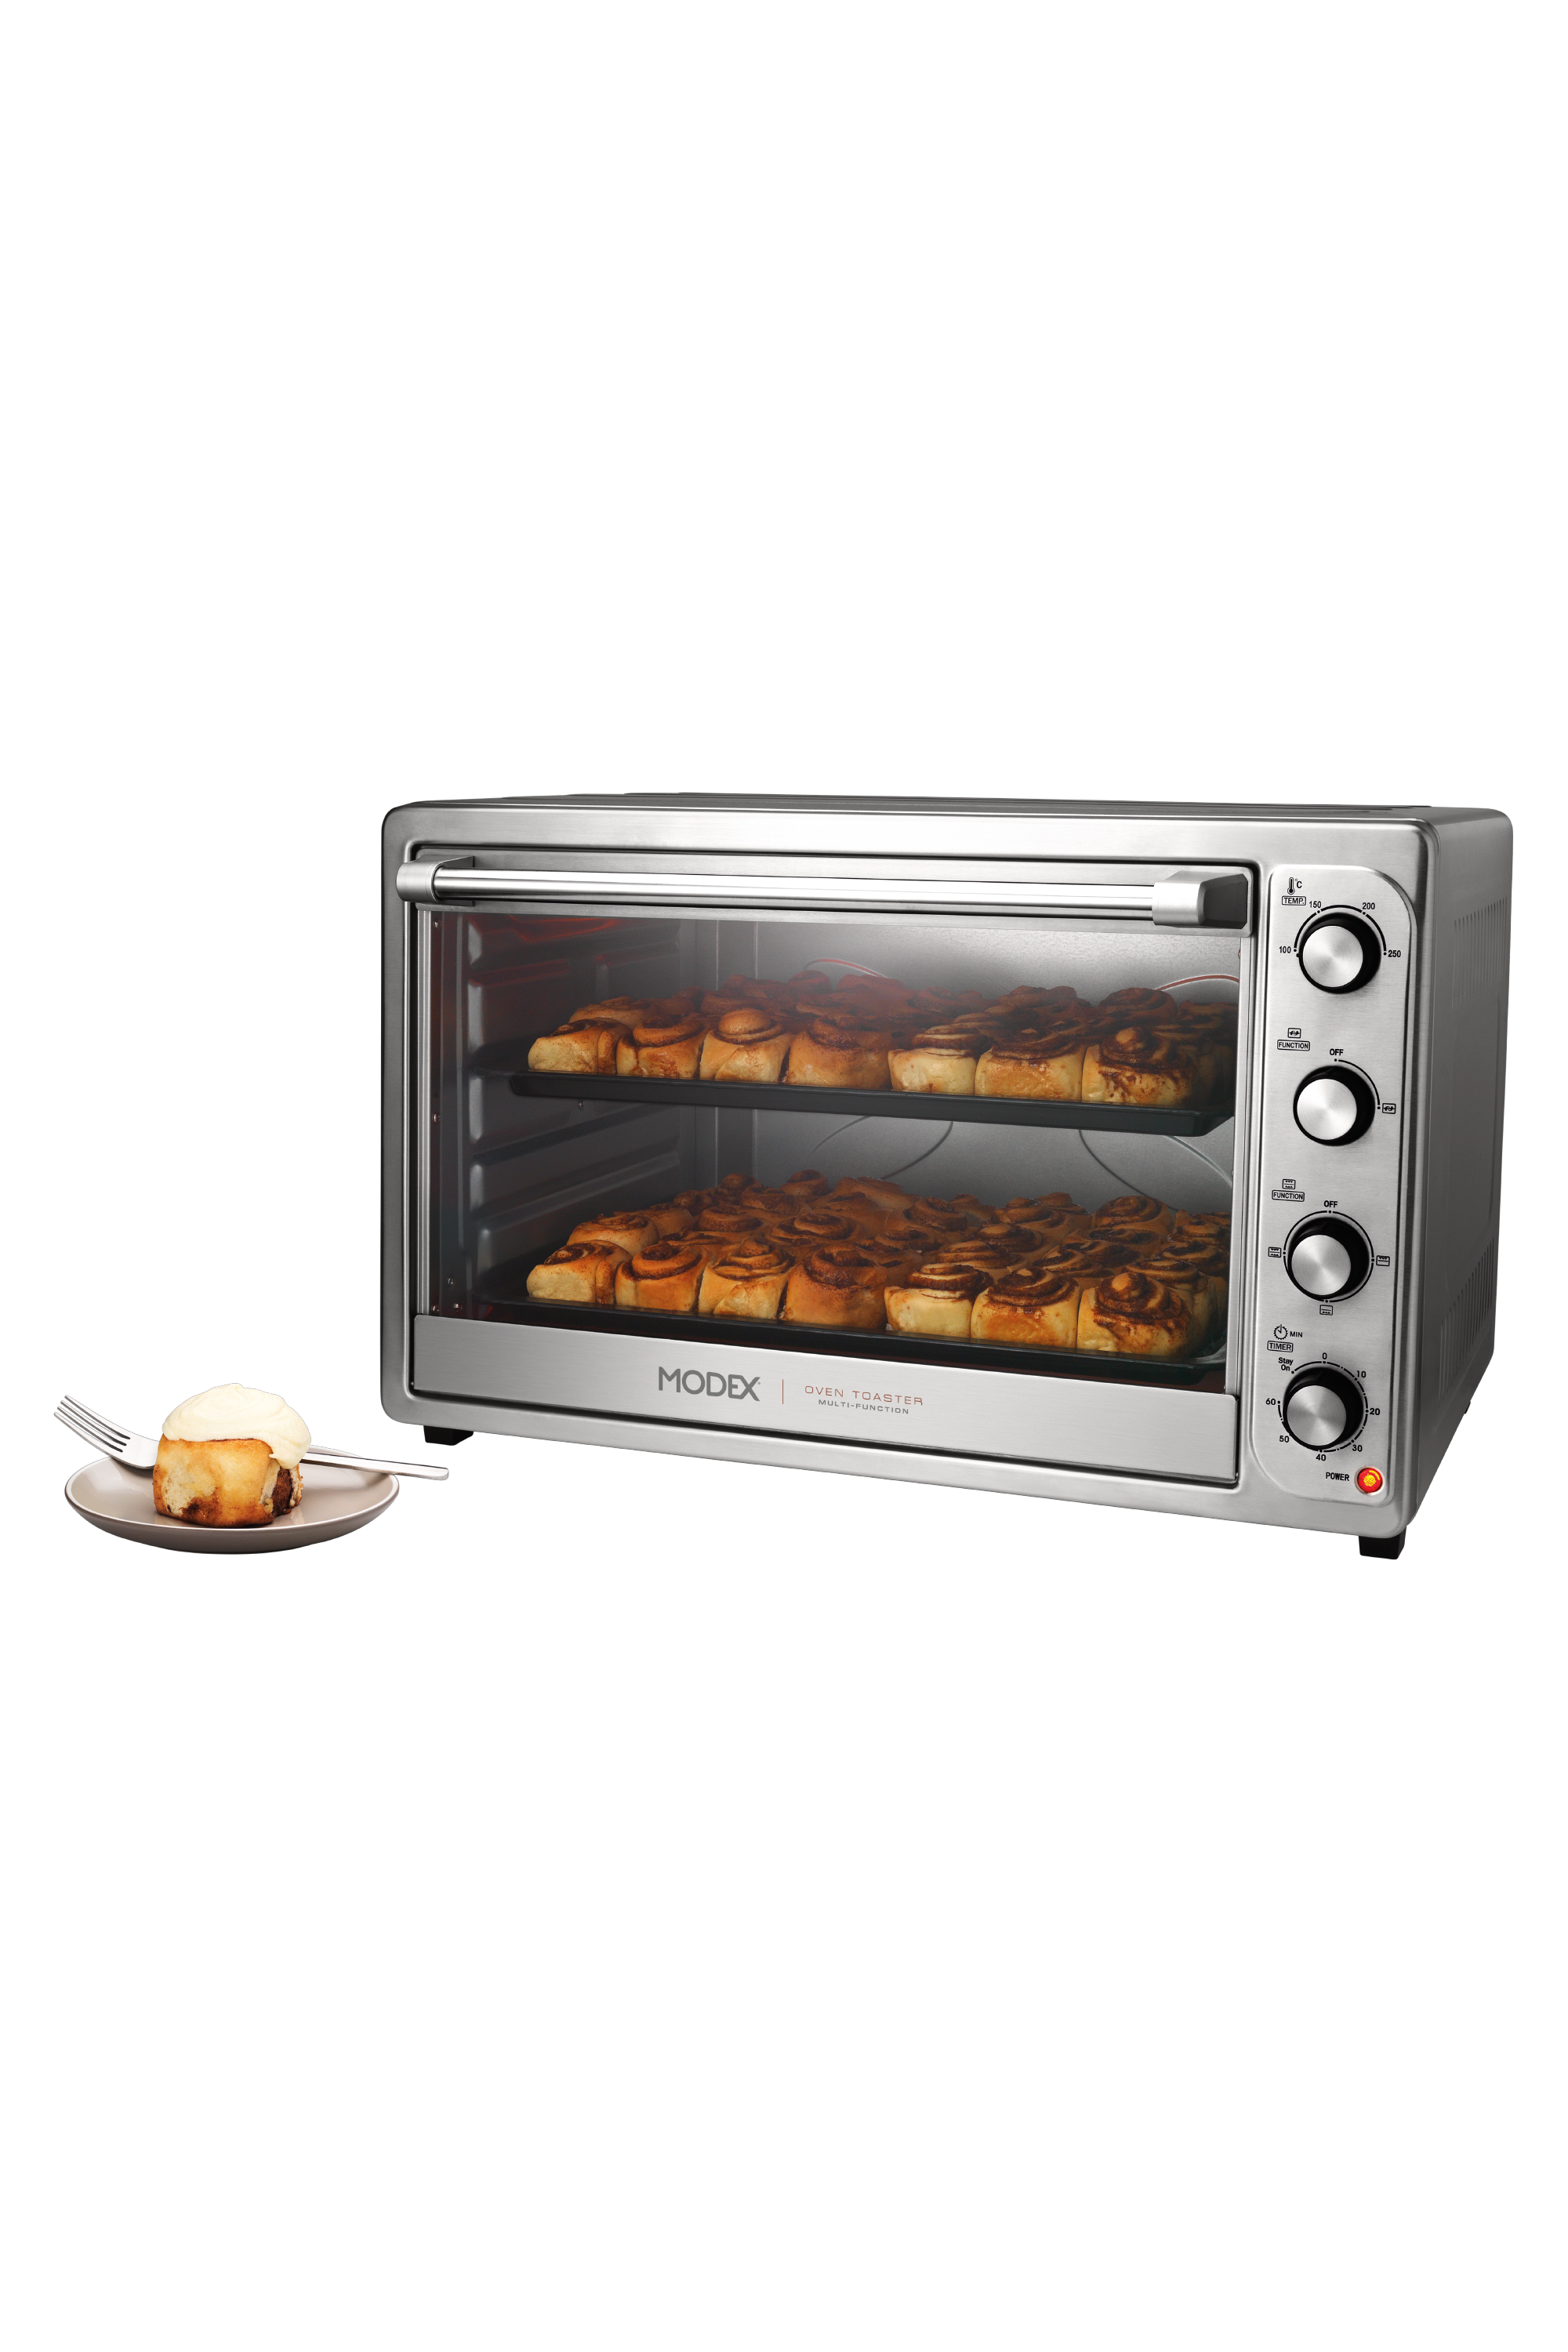 Ov9450 45L Electrical Oven